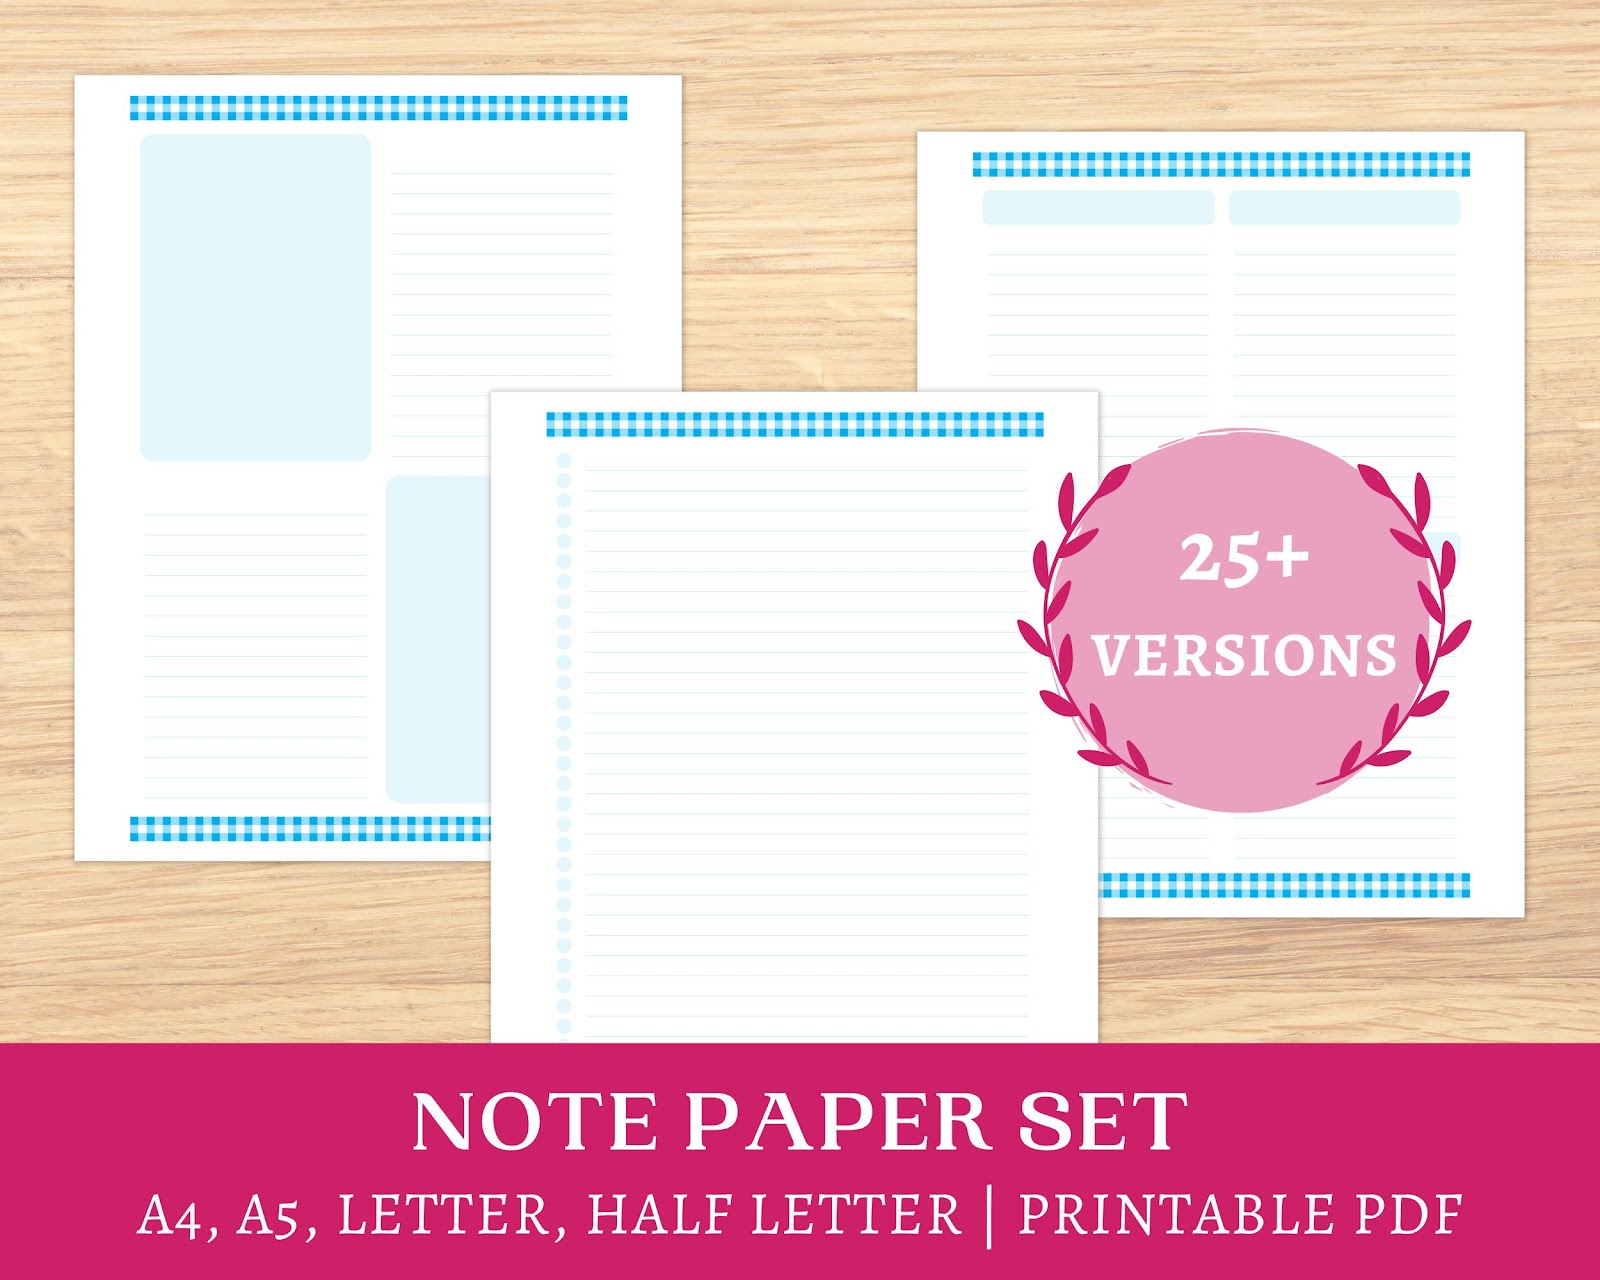 An aqua blue gingham border design and pale blue lines and colour blocks feature in this set of blank pages